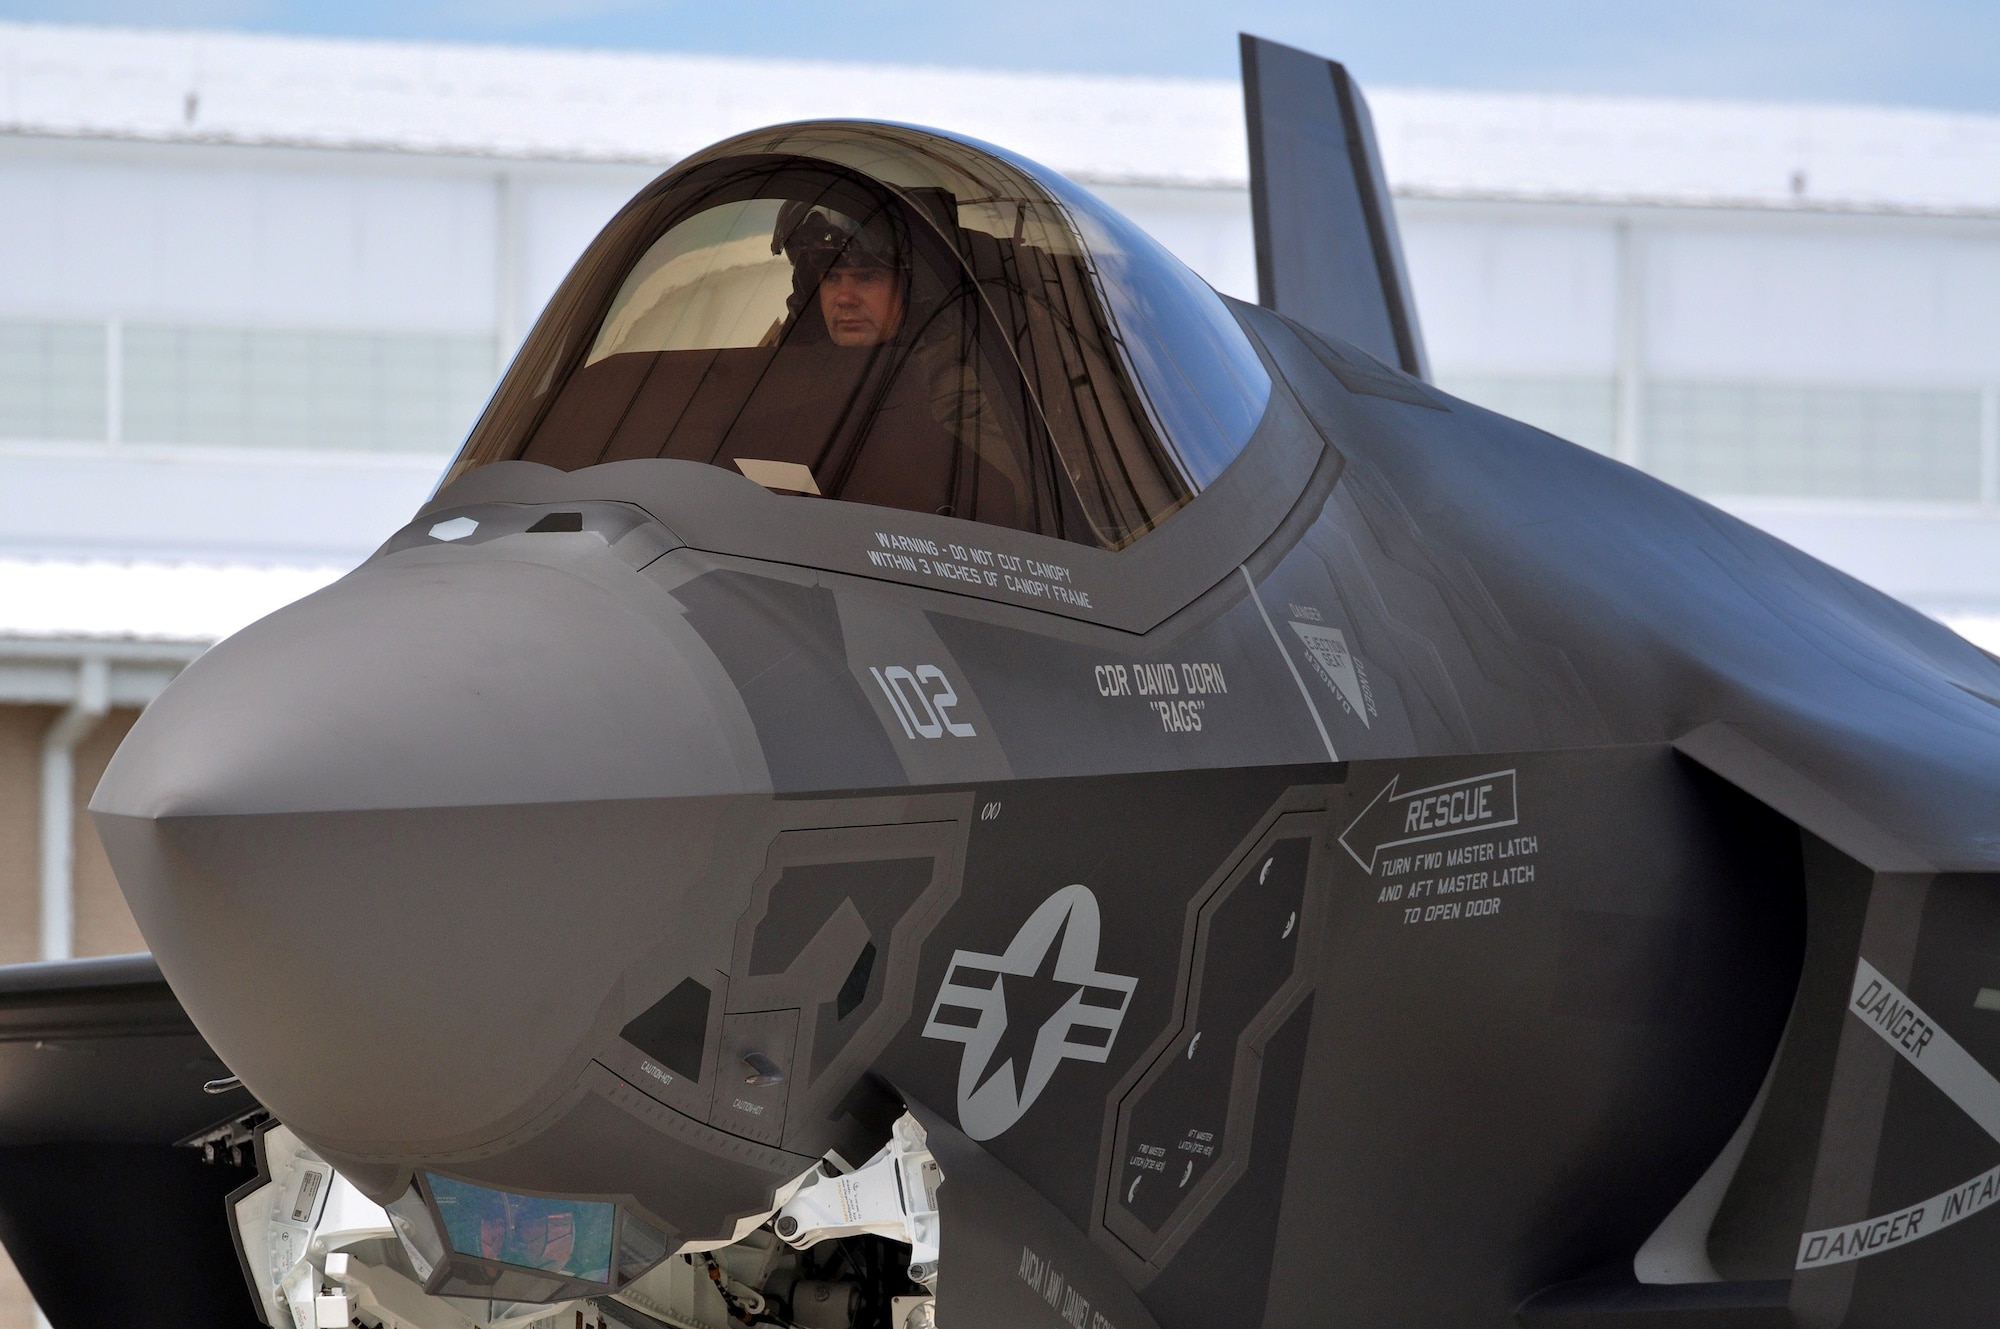 Navy Lt. Cmdr. Christopher Tabert returns from the first local flight of the carrier variant of the F-35C Lightning II, Joint Strike Fighter, Aug. 14, 2013, at Eglin Air Force Base's 33rd Fighter Wing. The unit, co-located at the wing, serves as the F-35C Fleet Replacement Squadron, training F-35C aircrew and maintenance personnel alongside Air Force, Marine and coalition partners in the joint strike fighter program. Tabert is an F-35 instructor pilot with the U.S. Navy Strike Fighter Squadron VFA-101.